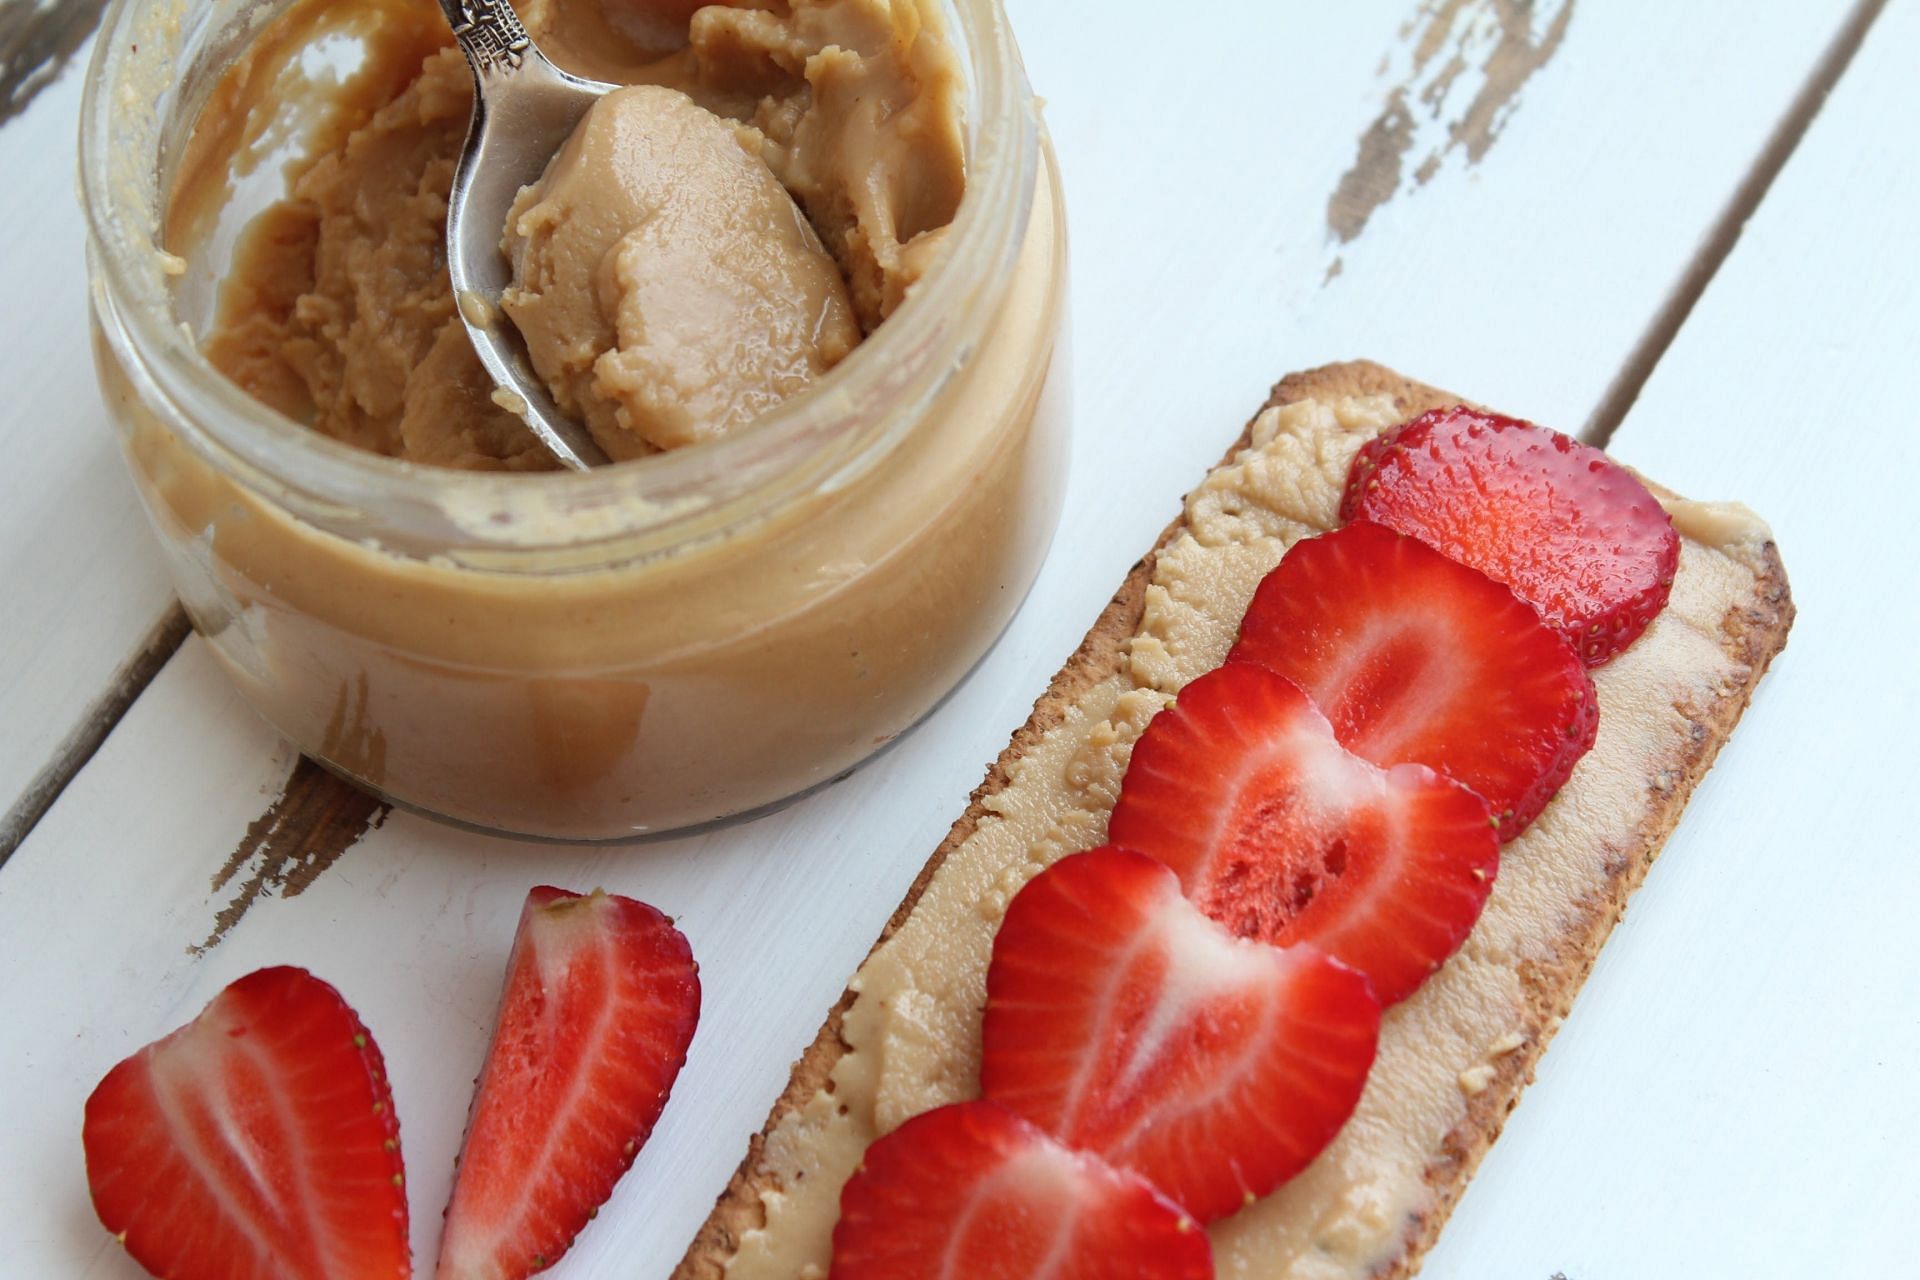 Eating PB everyday benefits (Image sourced via Pexels / Photo by pixabay)